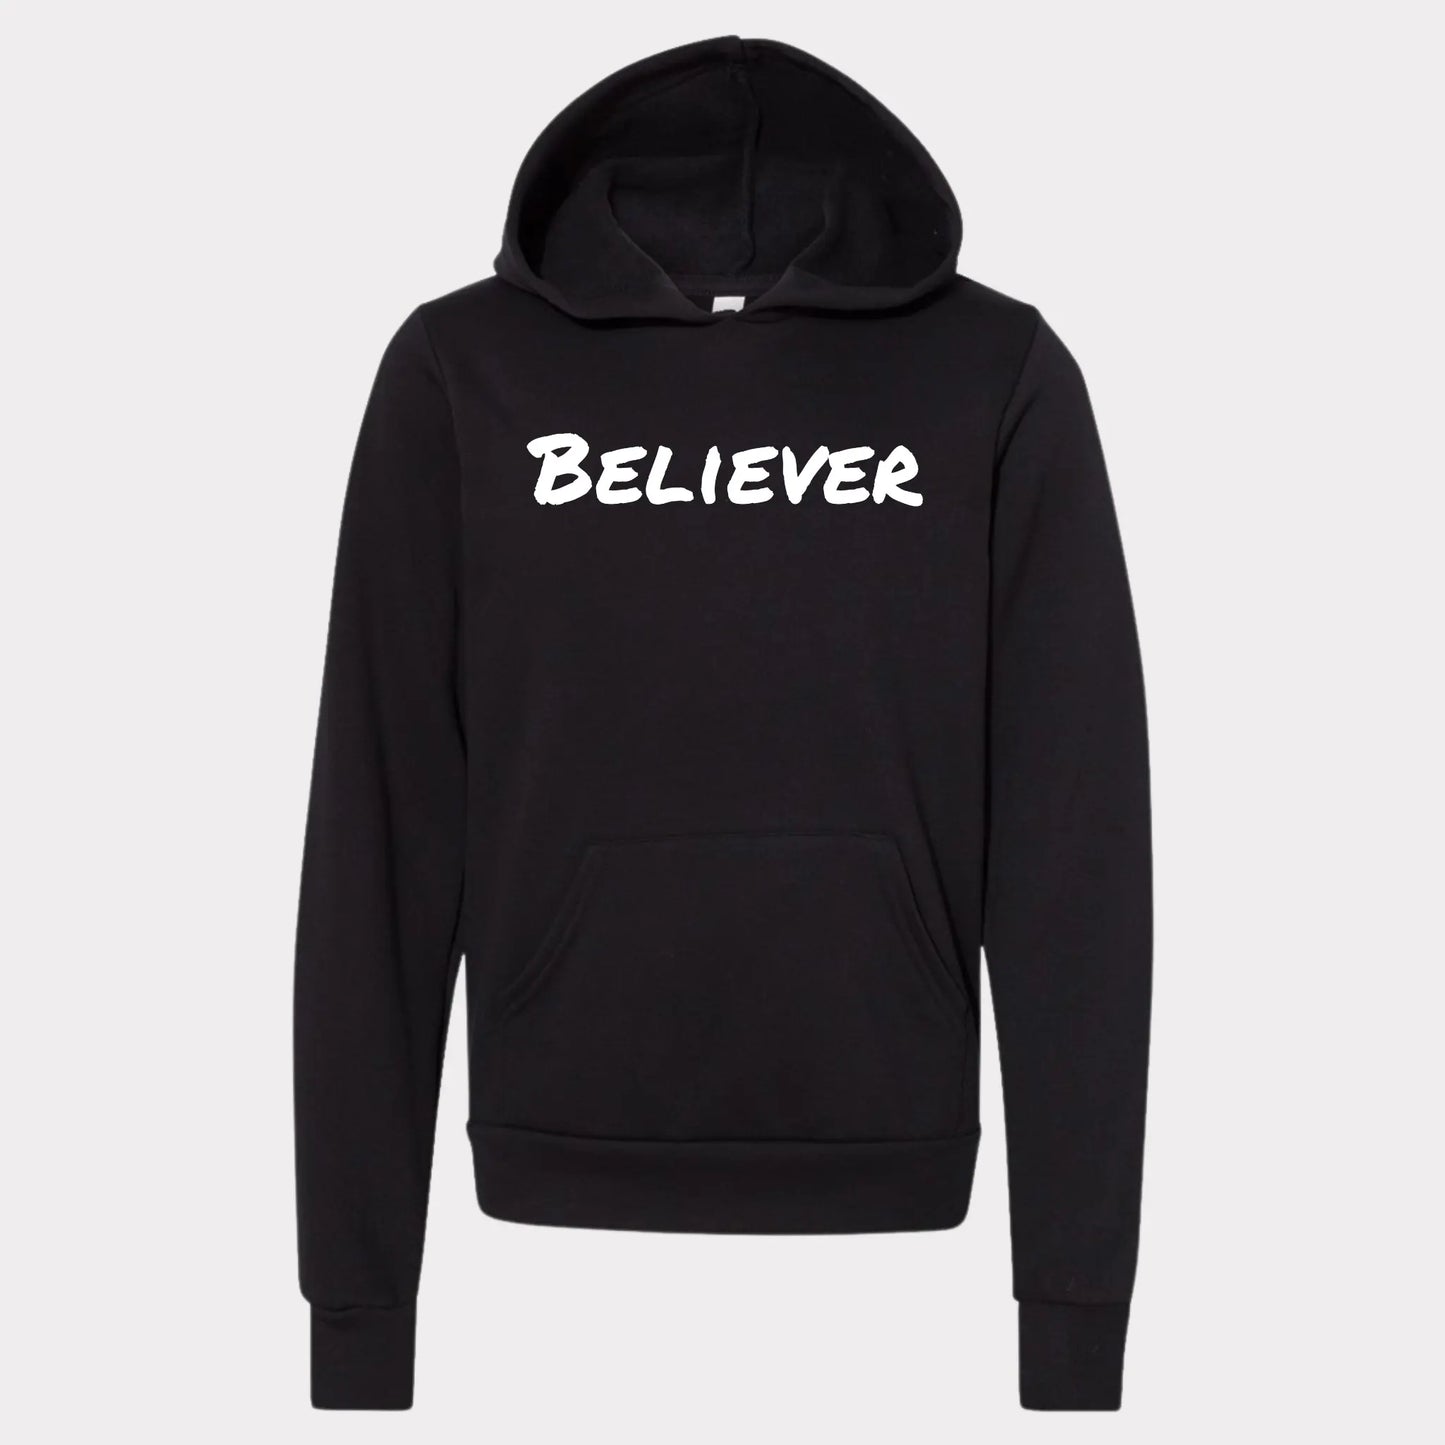 This hoodie is all black with a crew neck style. The words Believer are pressed on the shirt in bold white letters. Hoodie is written across the chest, stretching from sholder to shoulder. The Hoodie this comftorable and fitted. Size up for an oversized look. Edit alt text. On a Nuetral Colored back ground. The back reads John 3:16 on the tail of the Believer Hoodie. Believer Collection by Crown of Favor. Christian Clothing brand. Christian streetwear brand.